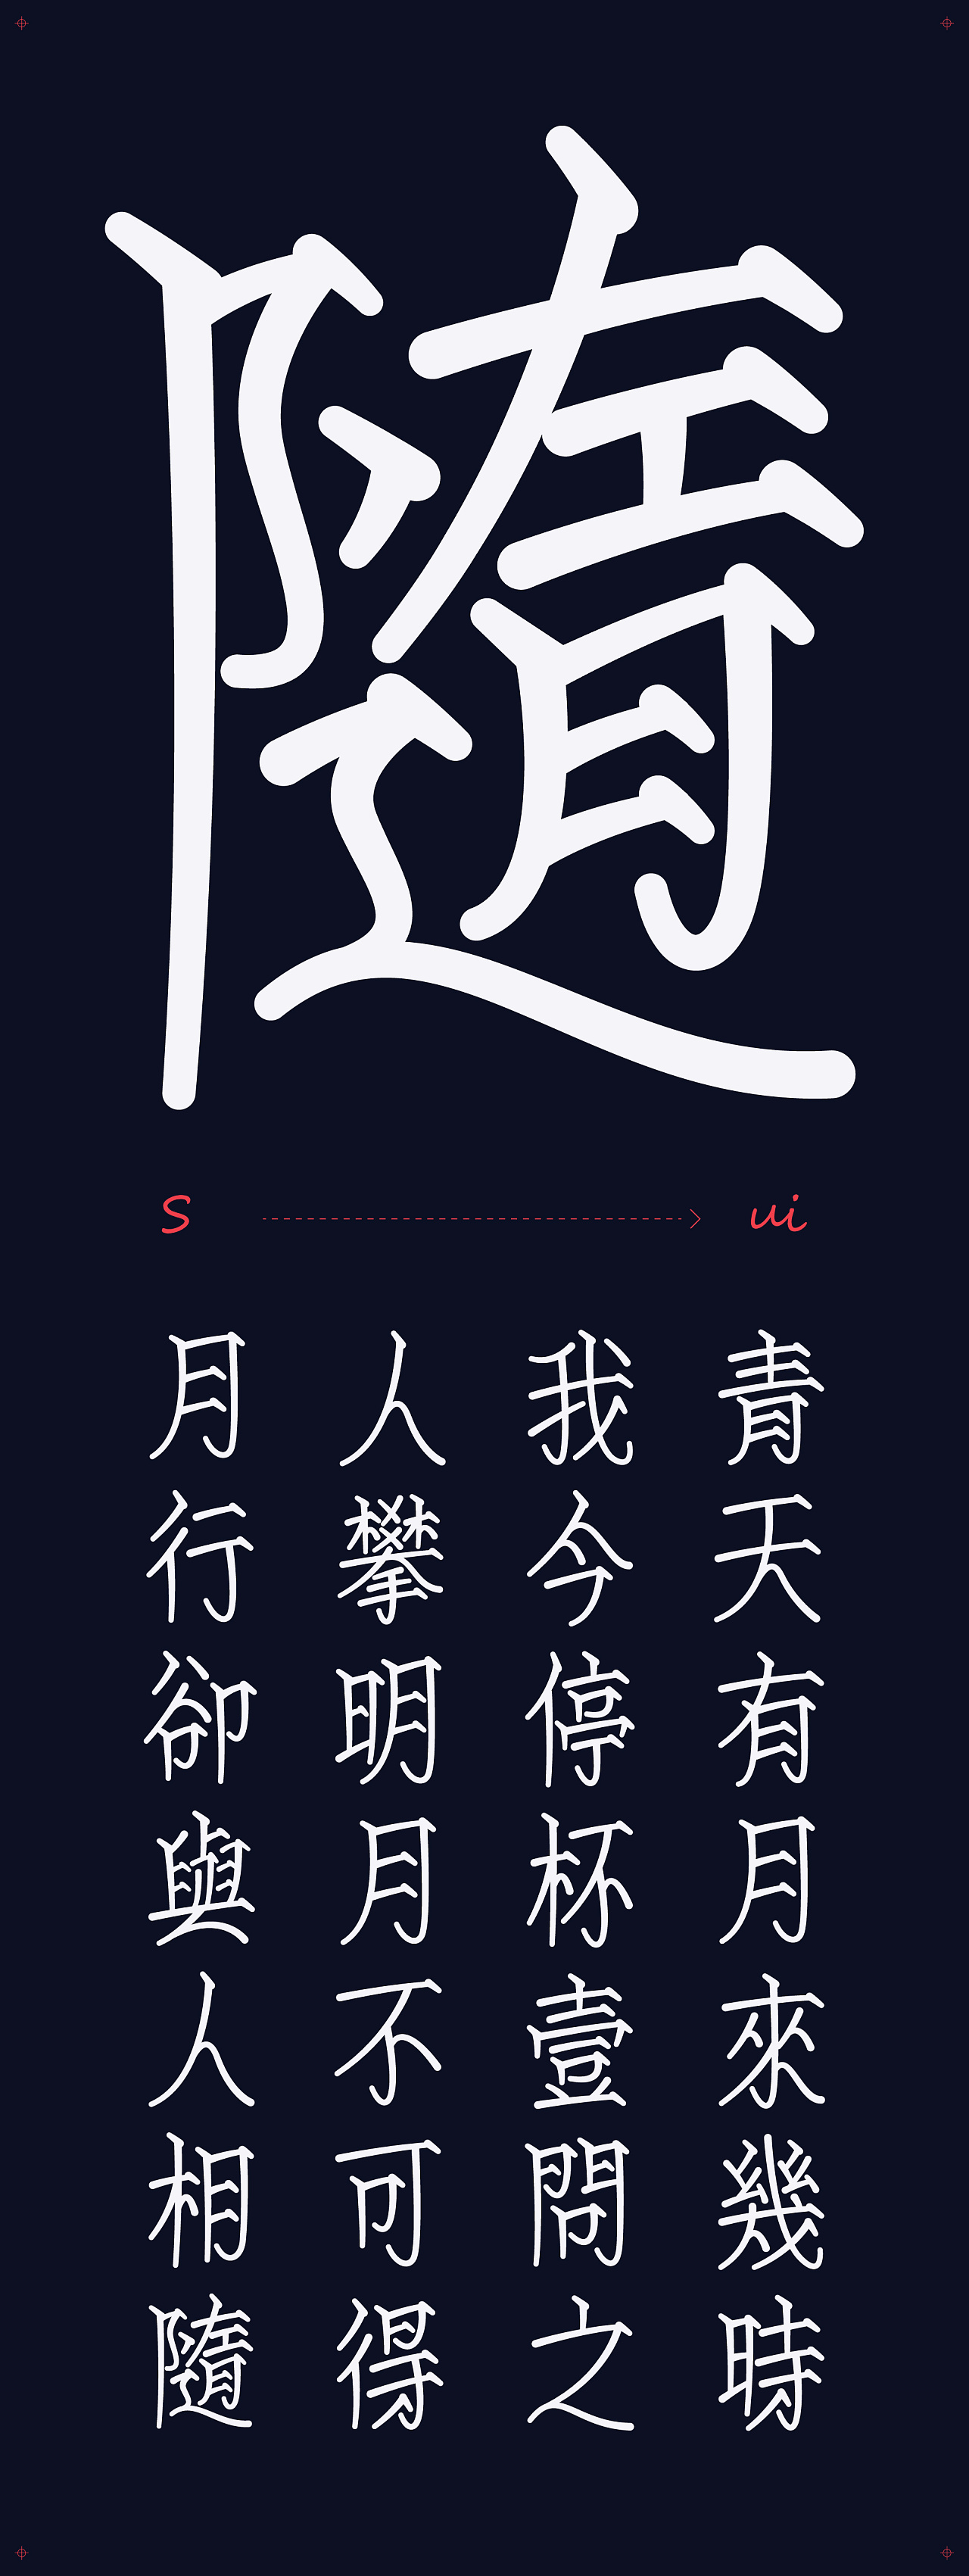 Chinese Creative Font Design-Font Design of Ancient Poems